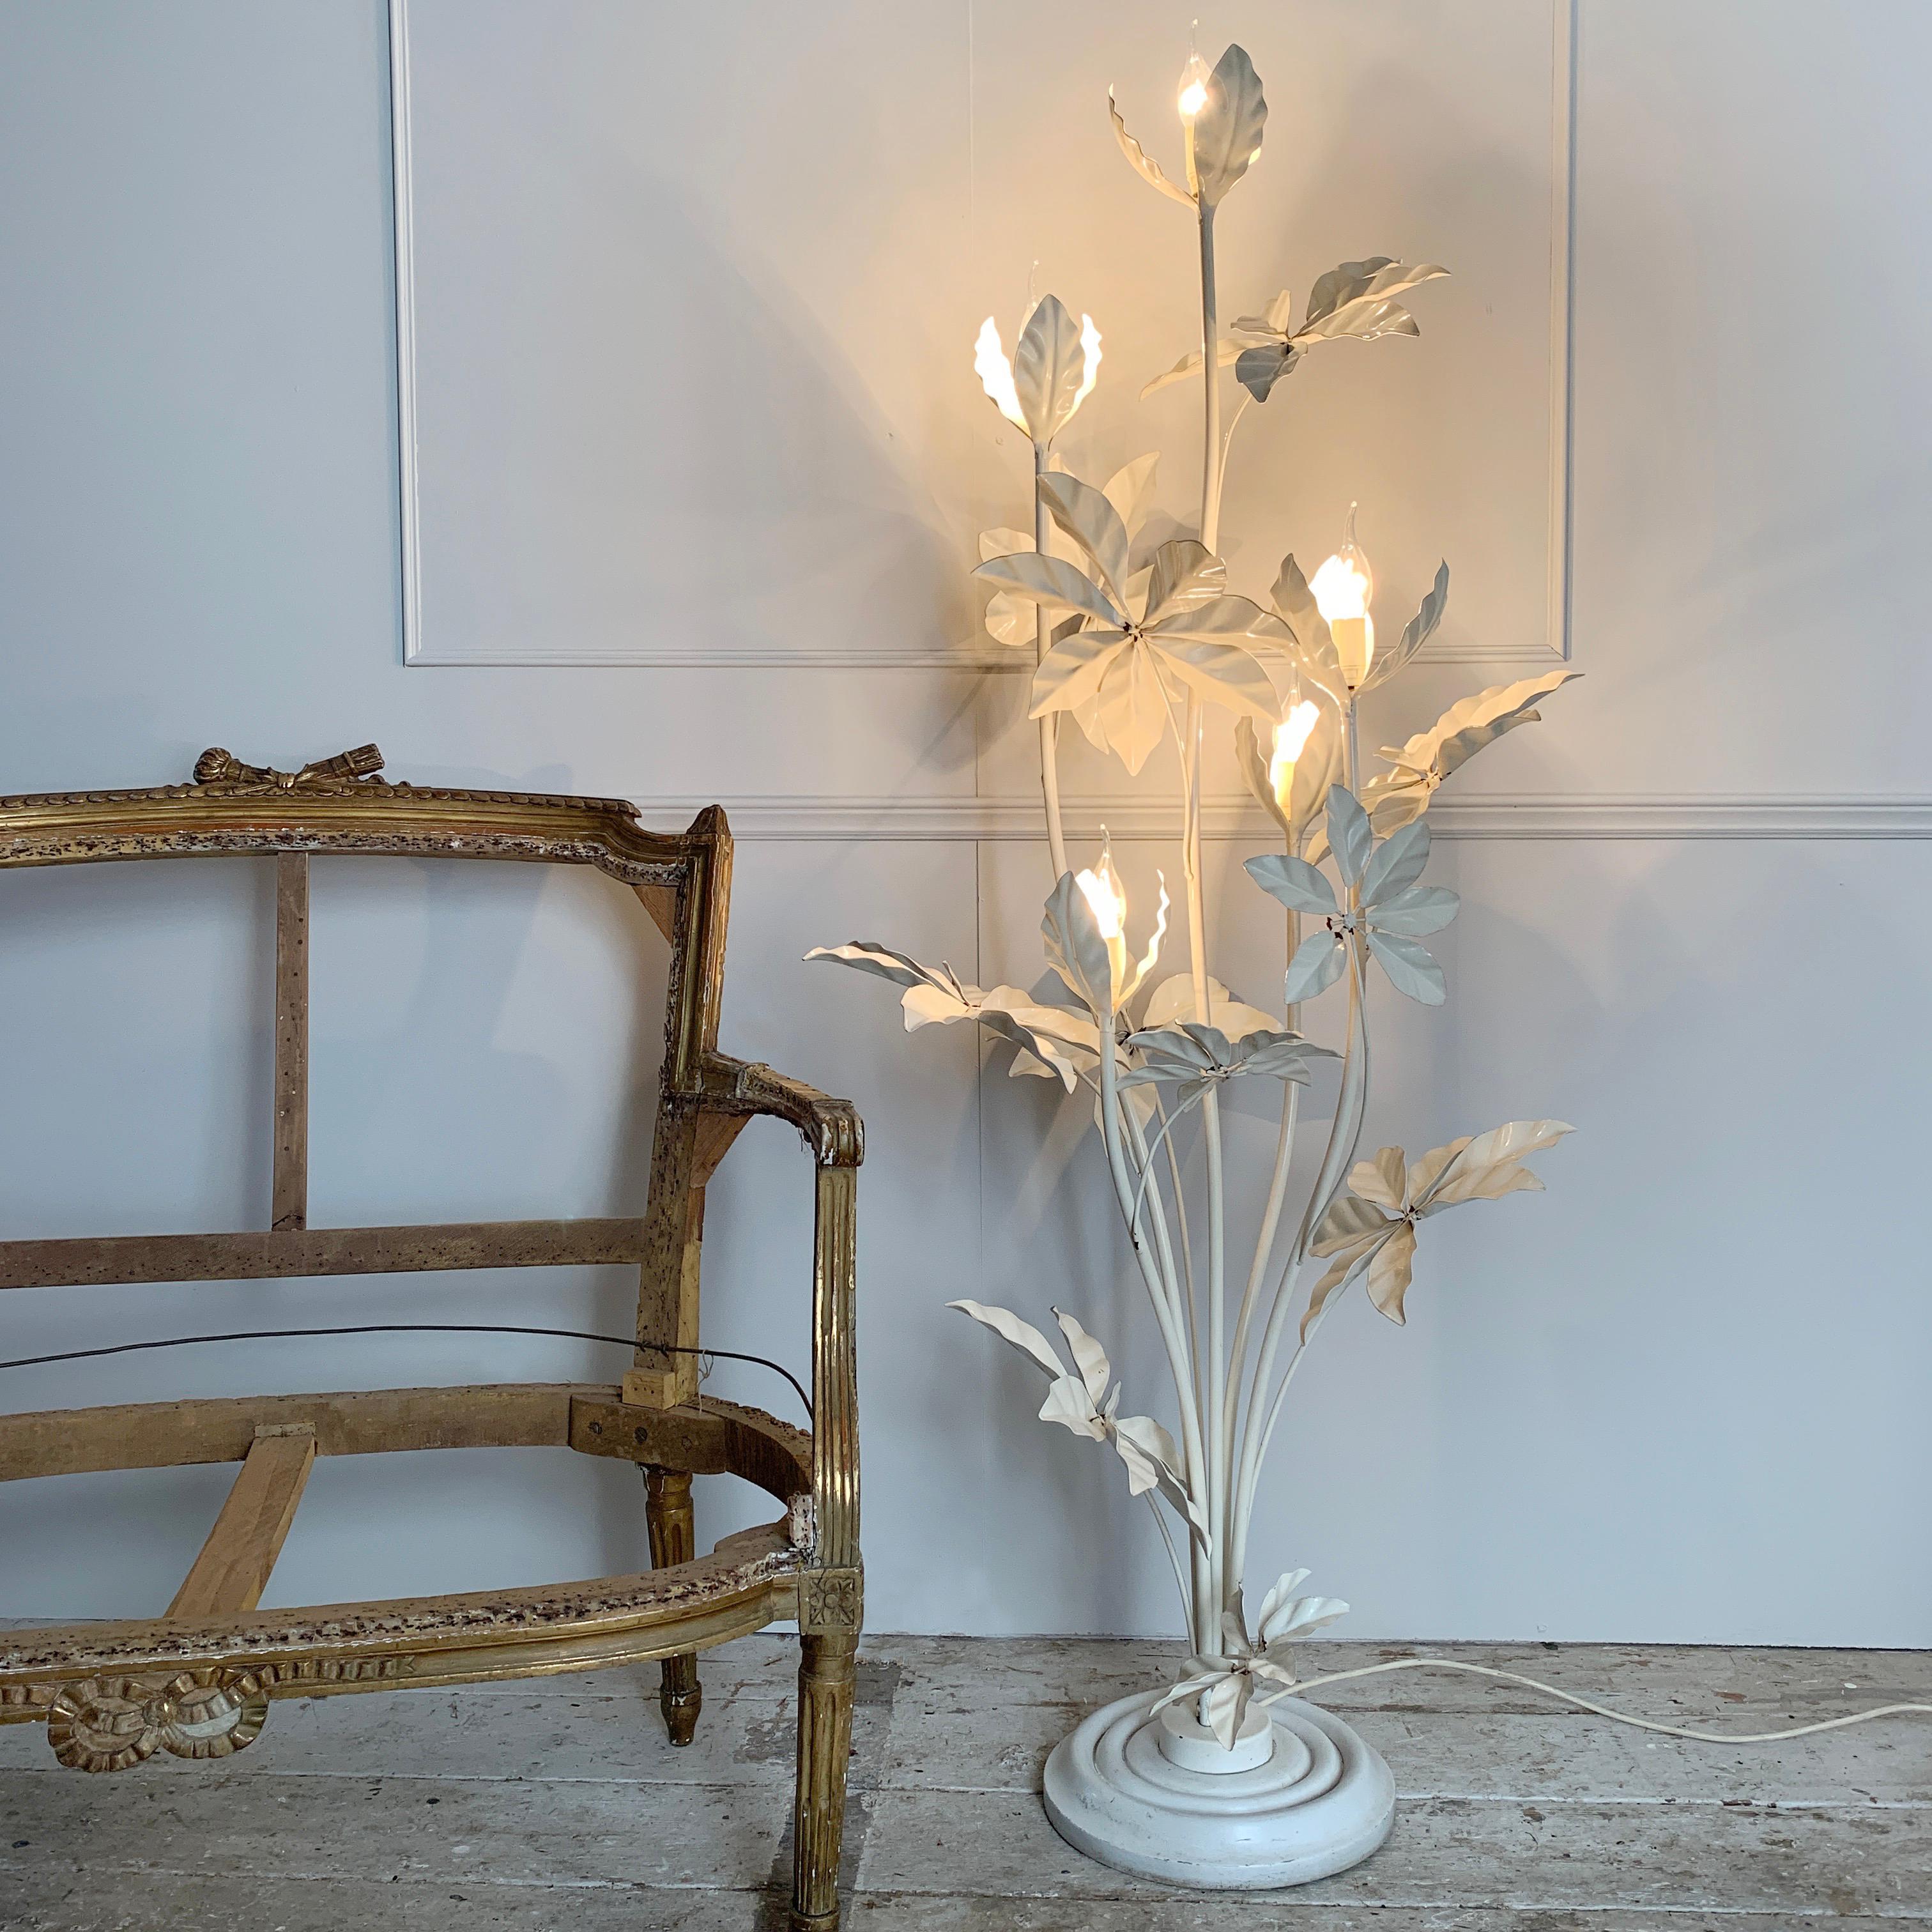 Midcentury soft white tole floor lamp
Hans kögl, germany, 1970s stunning large statement floor lamp
The light as five tall stems each with a bud and bulb holder at the top, the stems are flanked smaller stems and large leaves
Original white paint